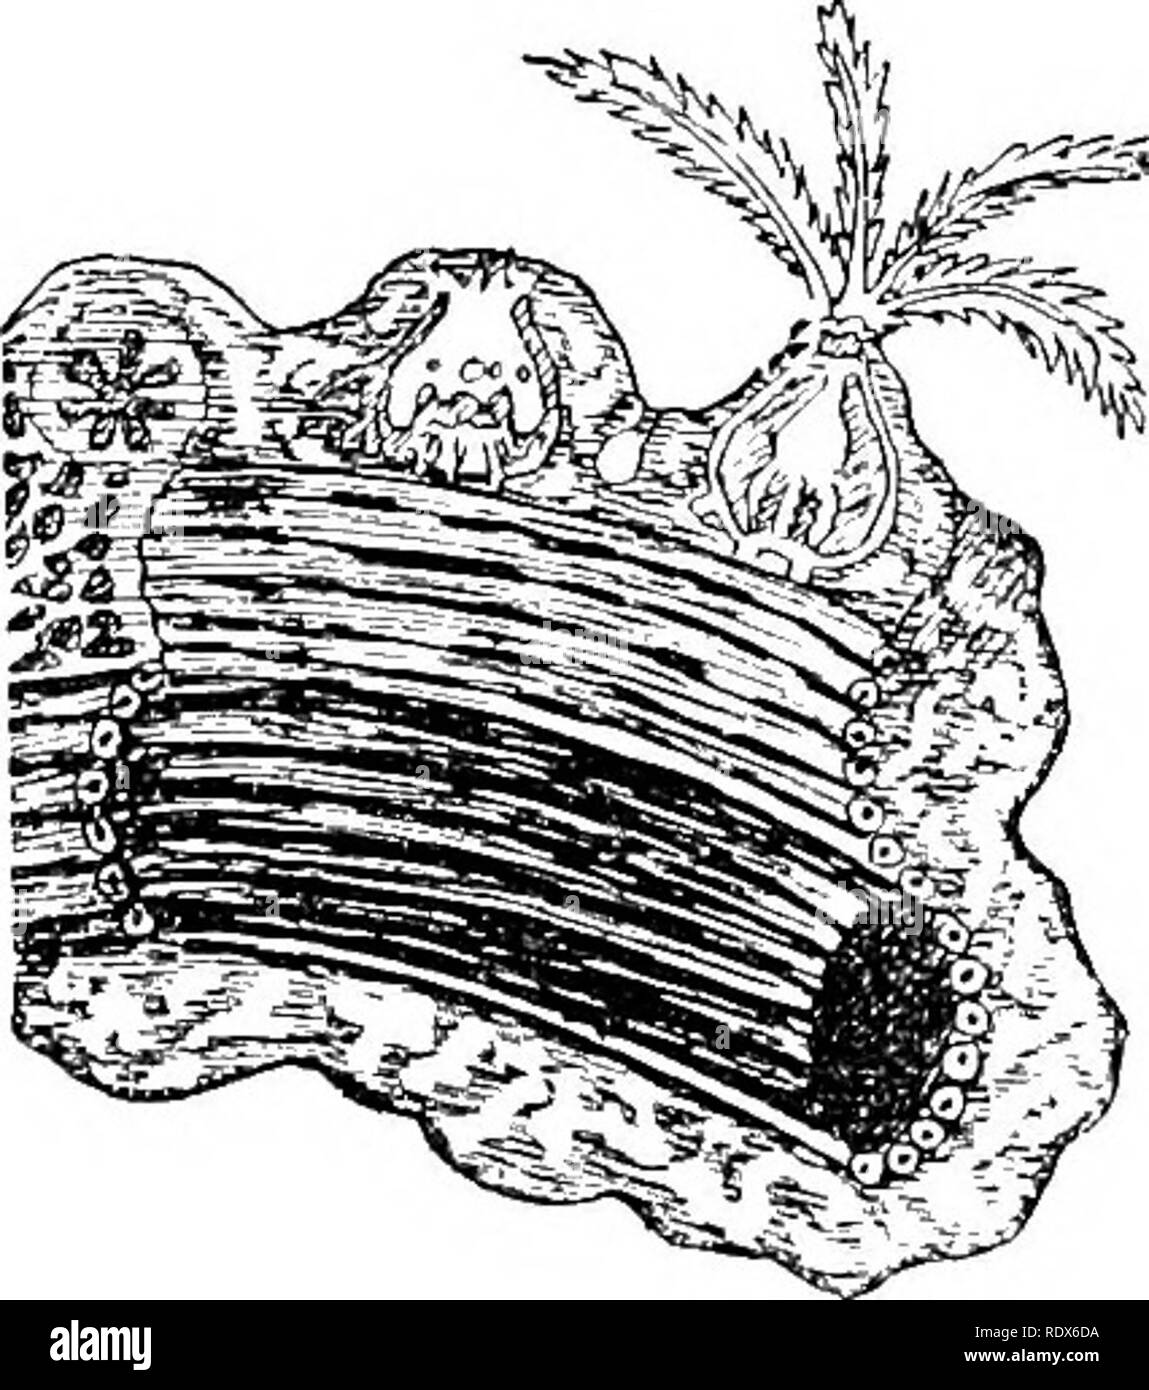 . Natural history. Zoology. Fig, 17.—Oegan-Fitb CoaAL (Tubipora musica). chalk and horn alternately. The fleshy crust which covers the axis, and out of which the individual polypa protrude, is supported by chalky spicules or plates scattered through its substance (see Fig. 18). There are, however, massive forms produced by the eight-rayed polyps which have no central skeletal axis, such as the Blue Coral (Heliopora) and the Organ Pipe Coral (Fig. 17). In the latter, the polyps grow up side by side in separate tubes which result from the fusion of coloured chalky spicules. Those tubes, from whi Stock Photo